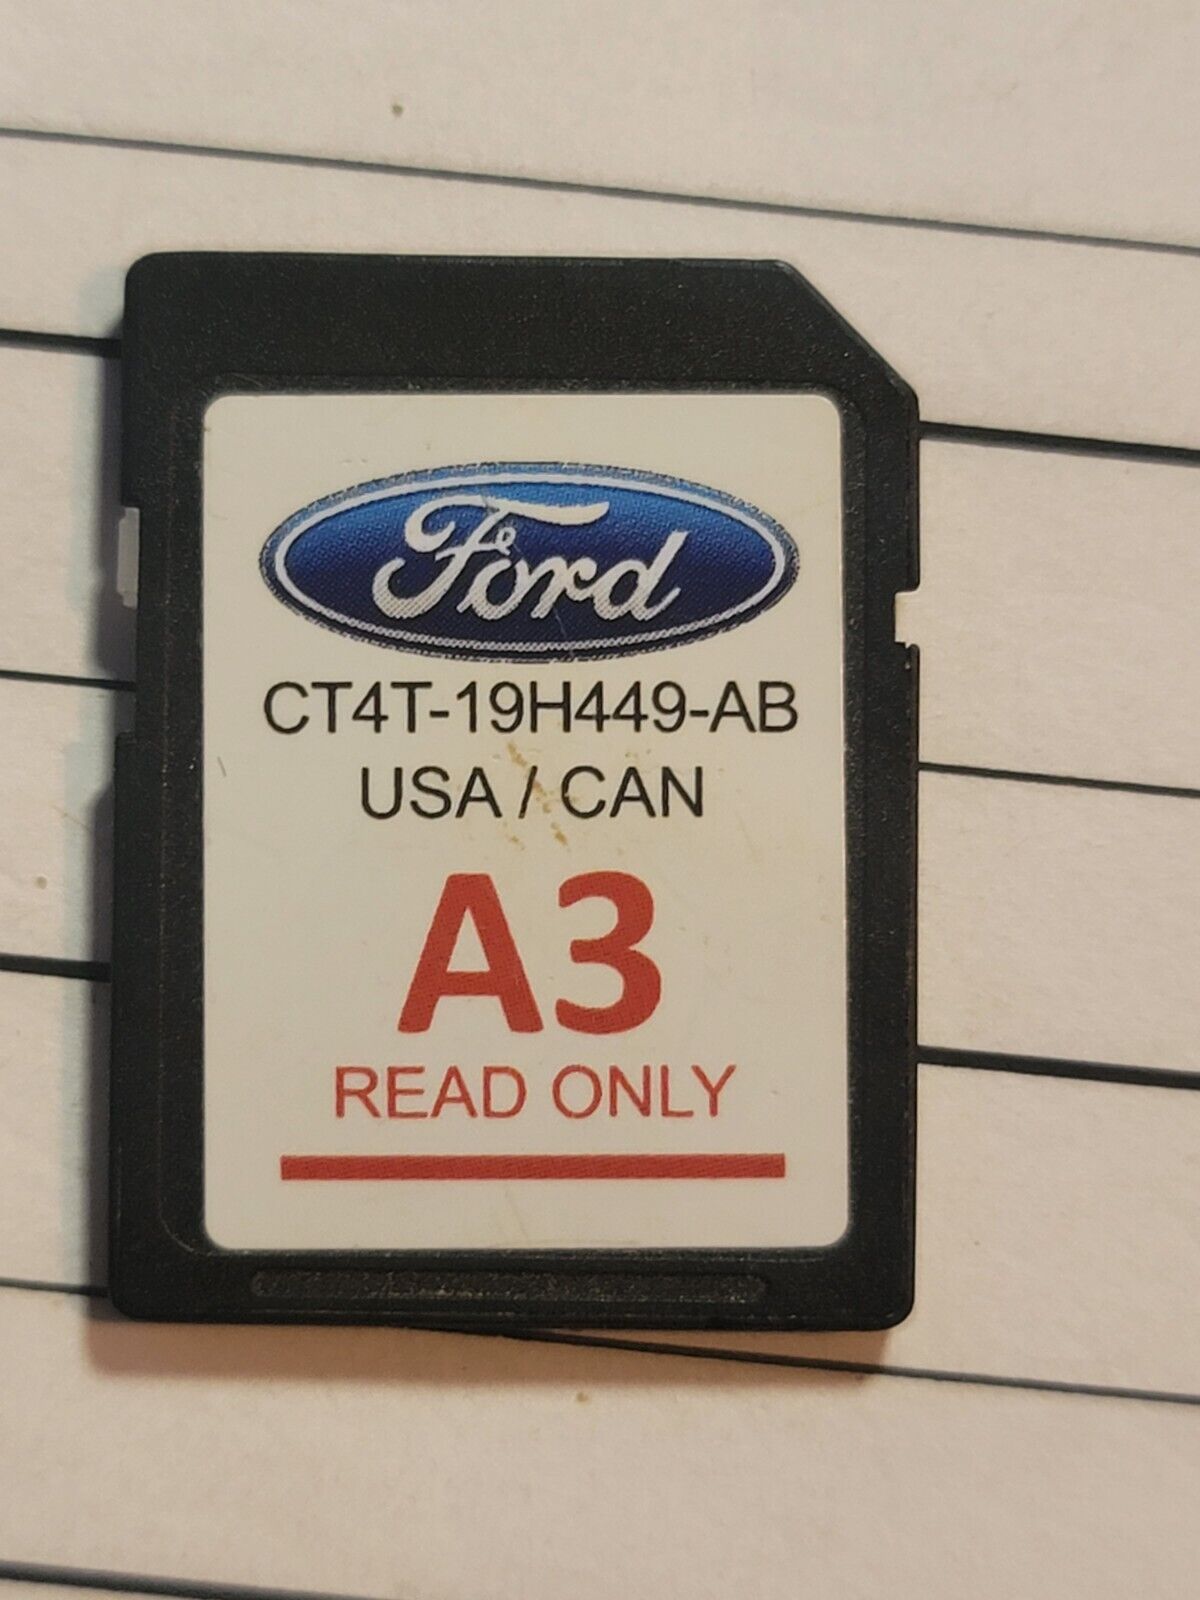 2013 Ford Cmax Navigation Nav Sd Card Oem Ct4t-19h449-ab A3 Map Usa Canada